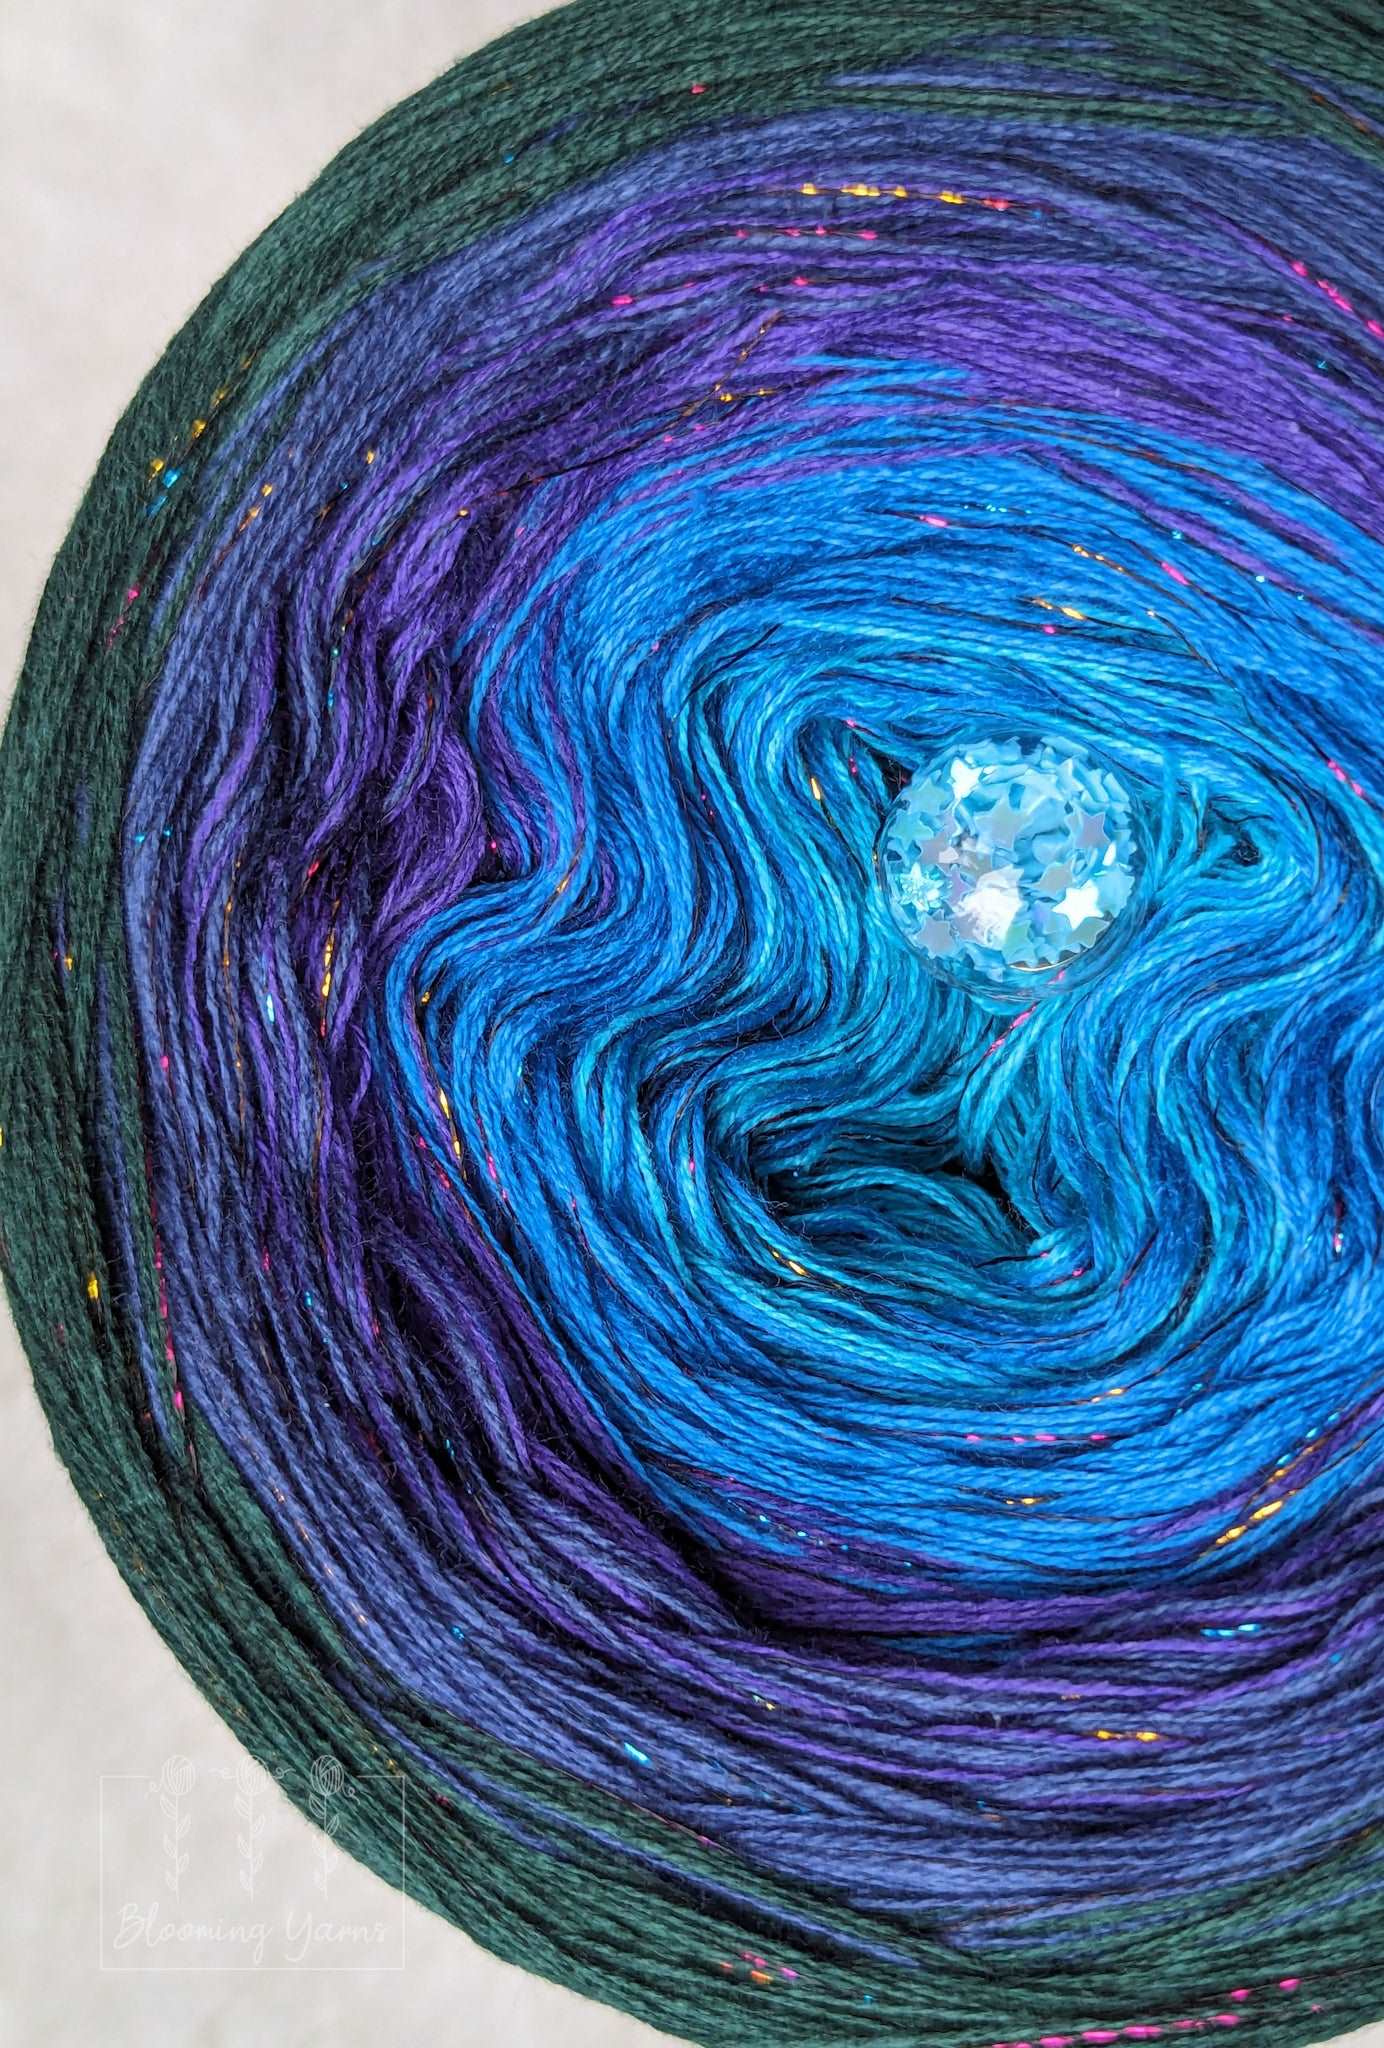 C294 cotton/acrylic ombre yarn cake, 220g, about 1000m, 3ply+lurex thread